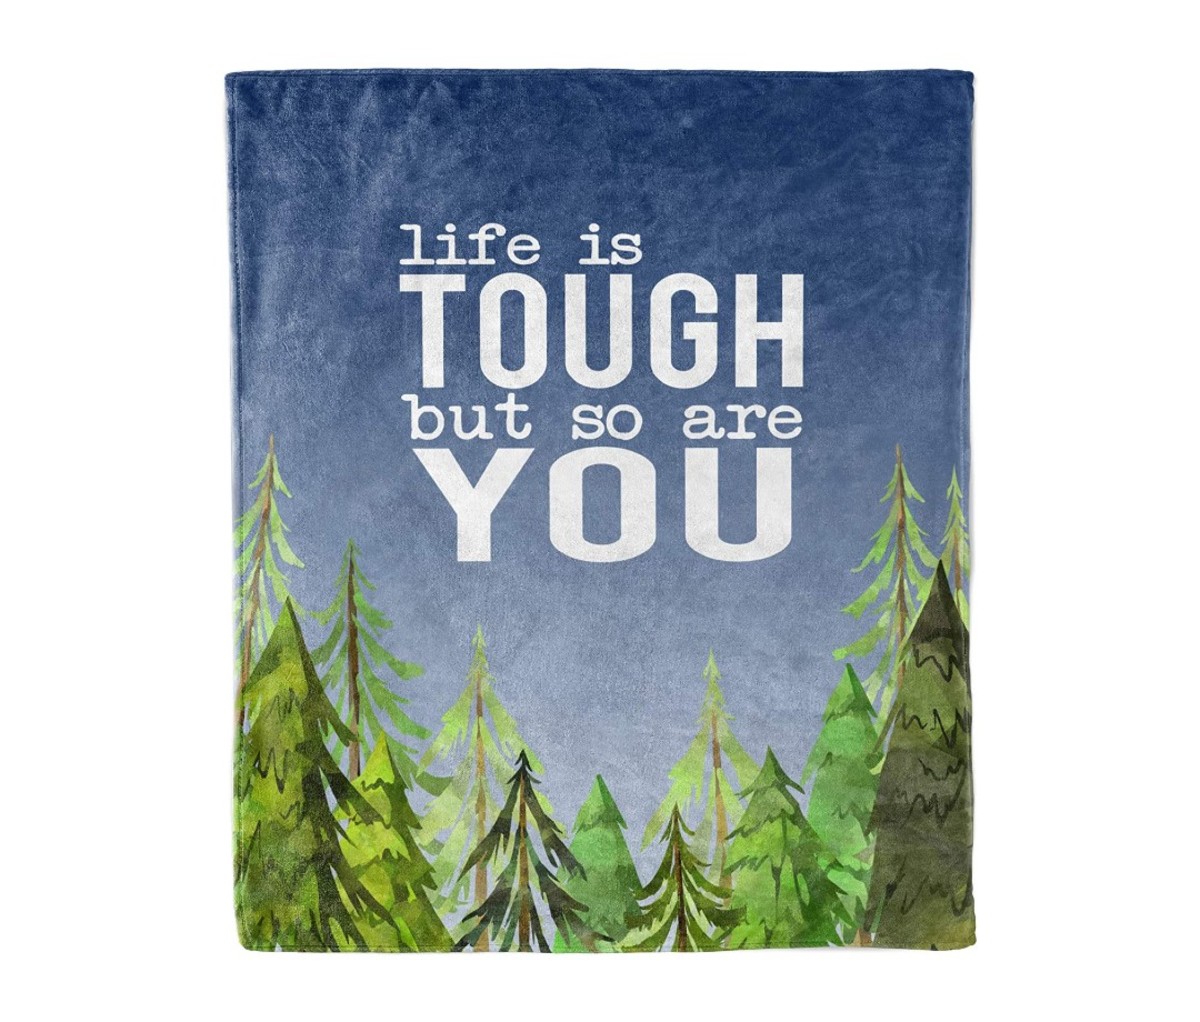 “Life is tough but so are you” blanket